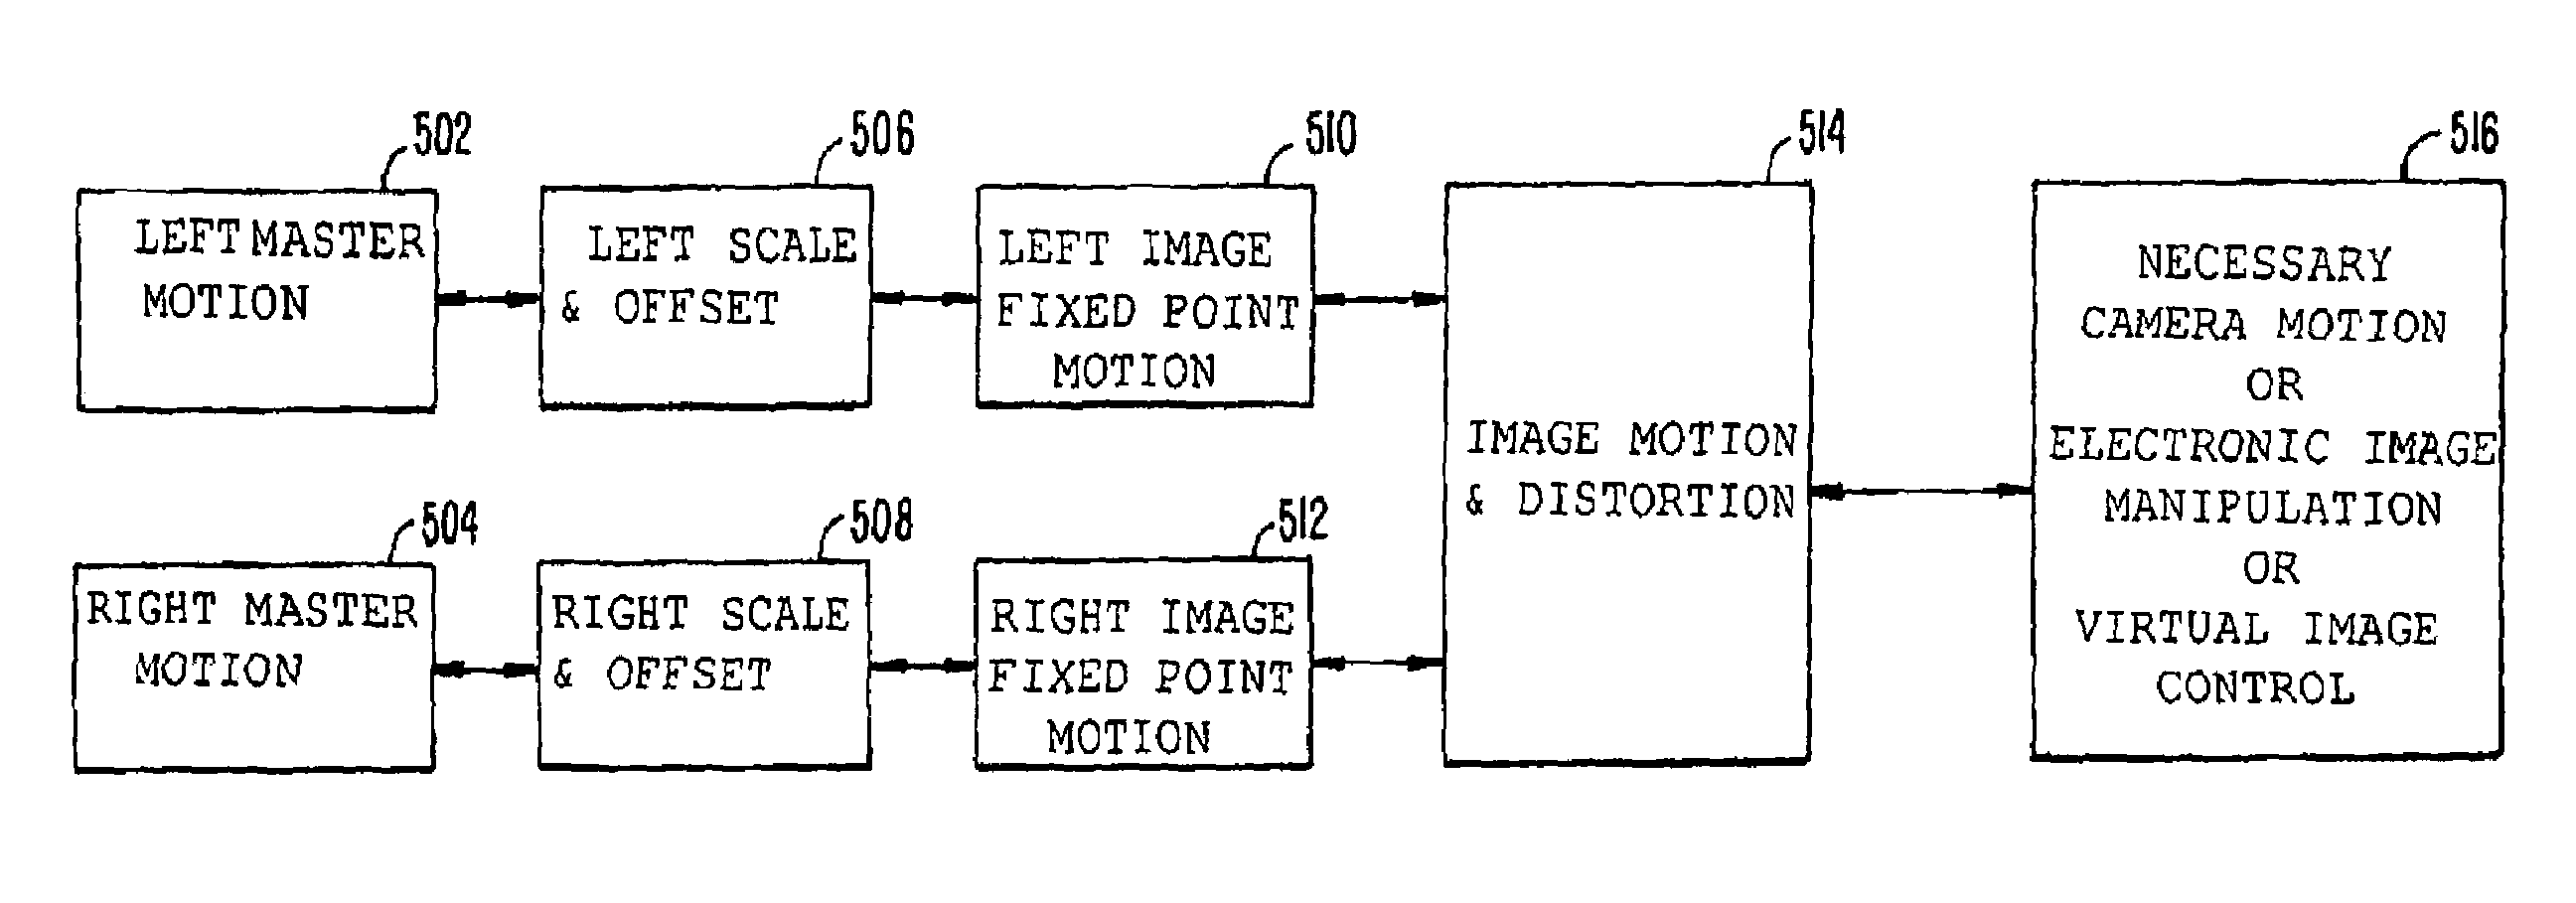 Image shifting apparatus and method for a telerobotic system